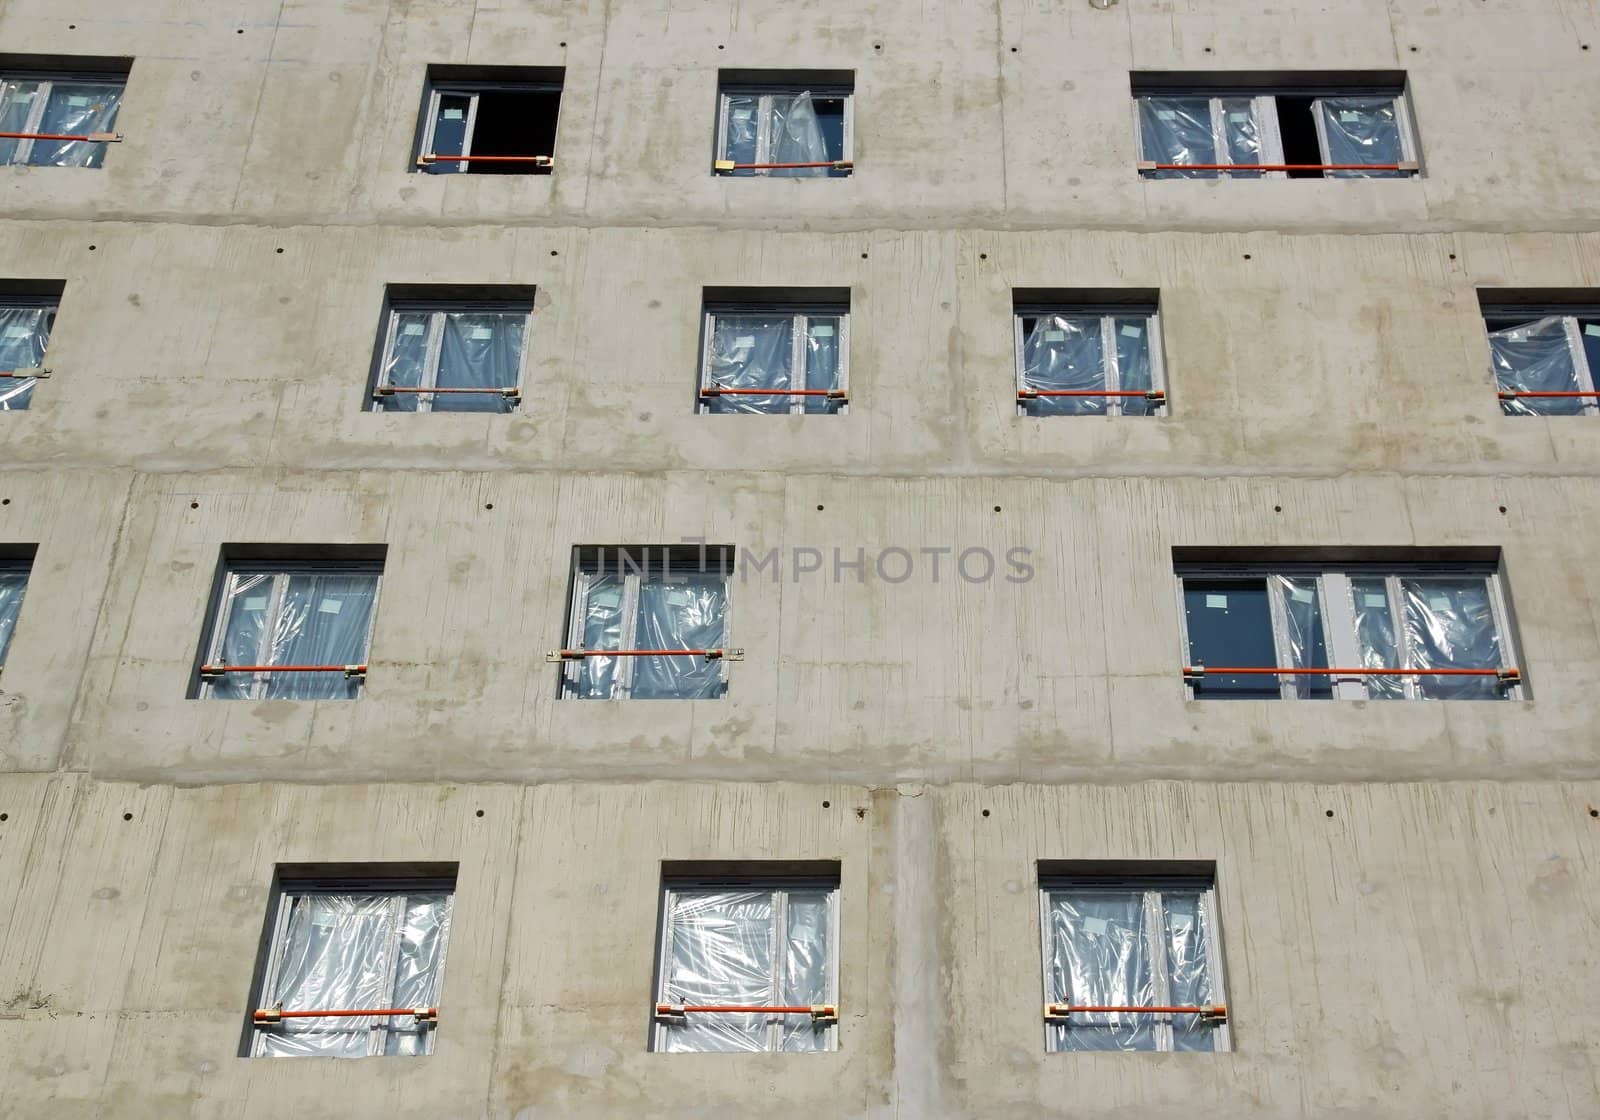 Laying windows, building under construction